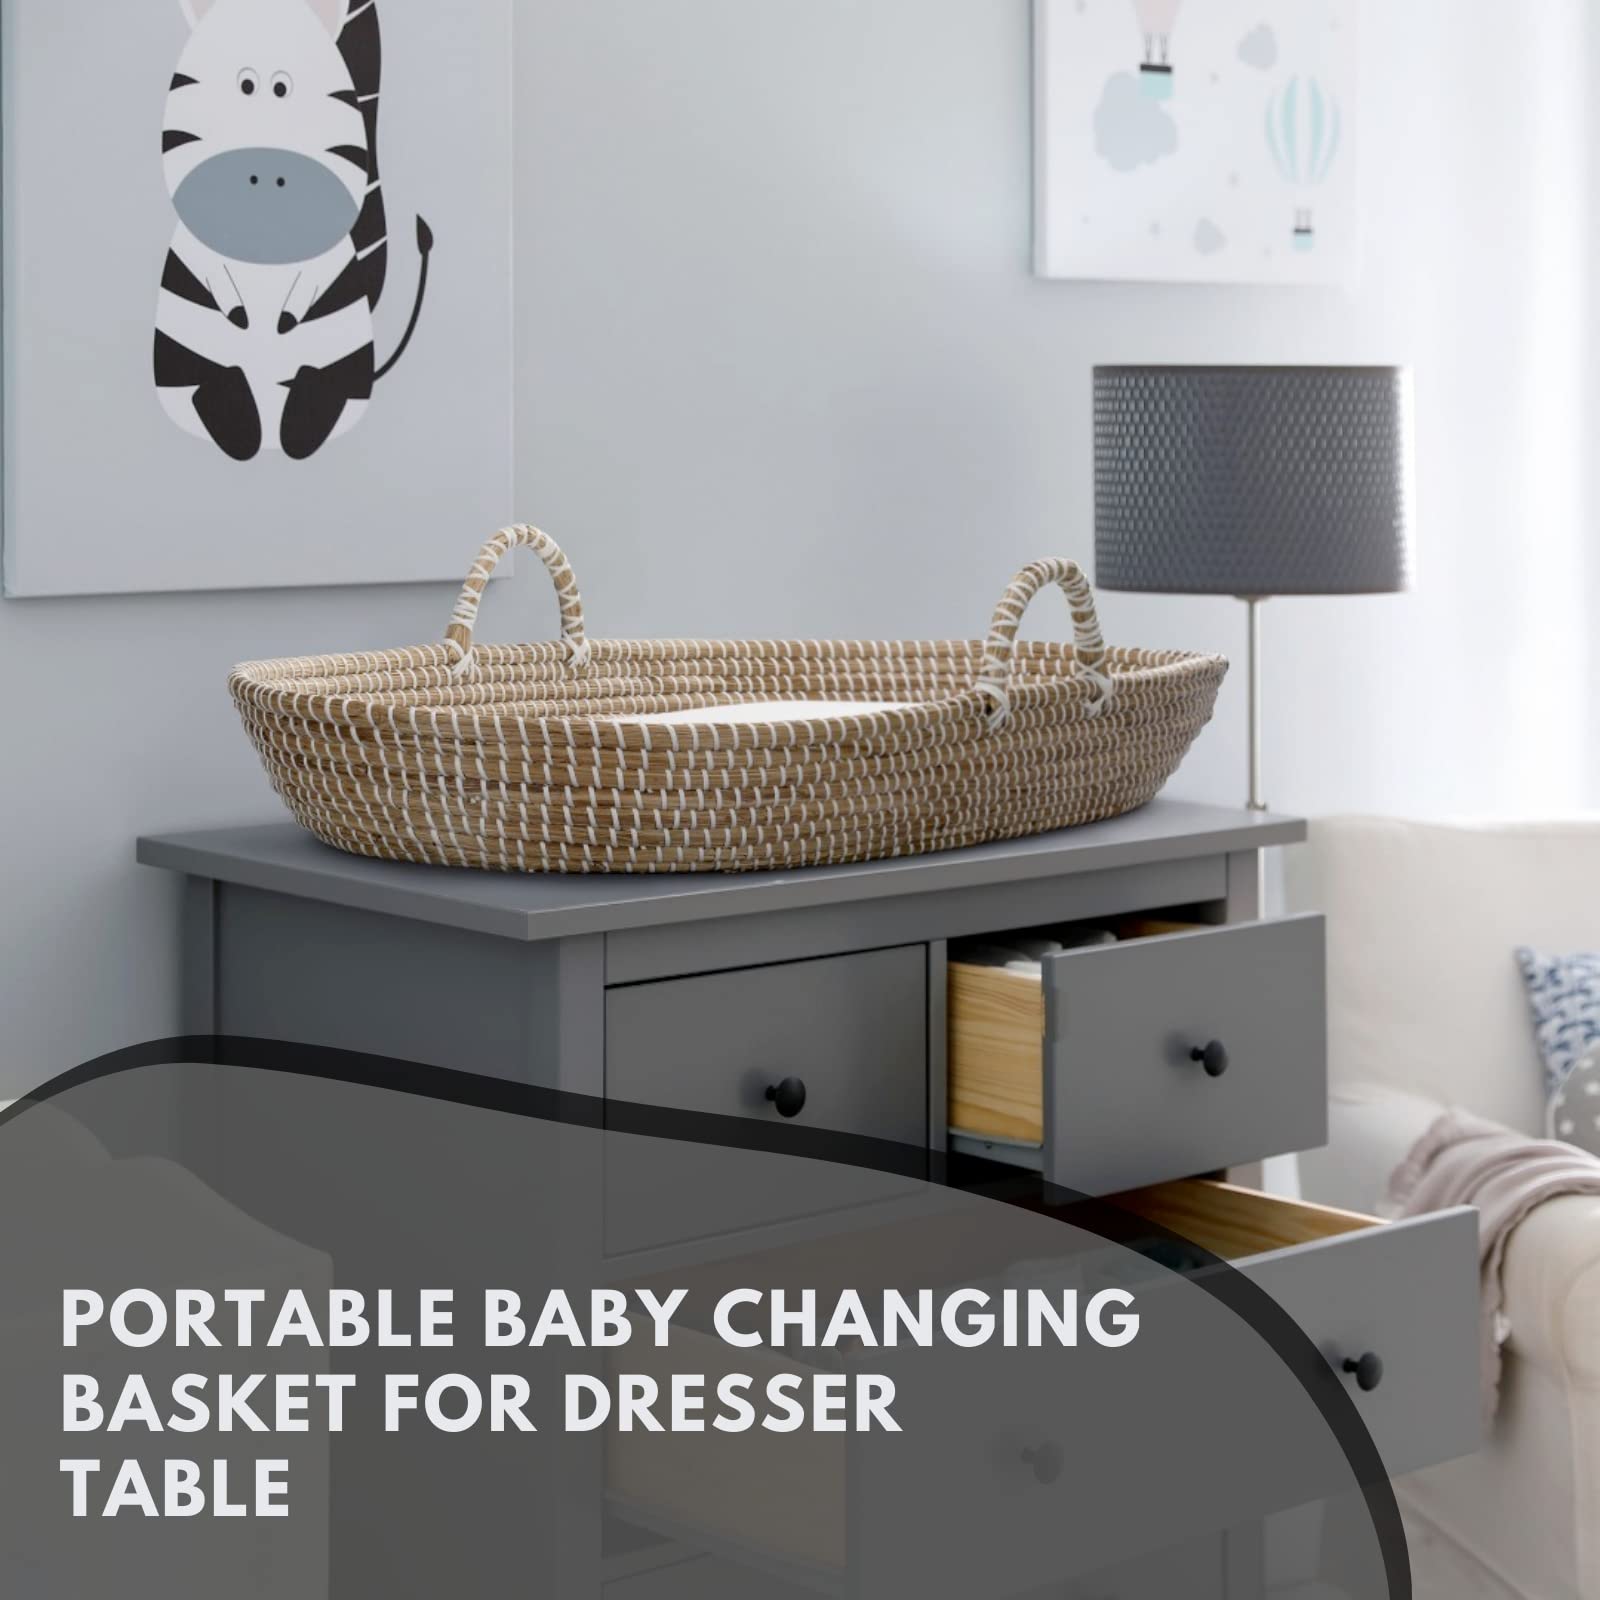 Baby Changing Basket with Pad - Seagrass Handwoven Moses Changing Basket for Babies with Waterproof Pad for Dresser Table - Baby Diaper Changing Basket with Thick Pad Changing Table Topper for dresser